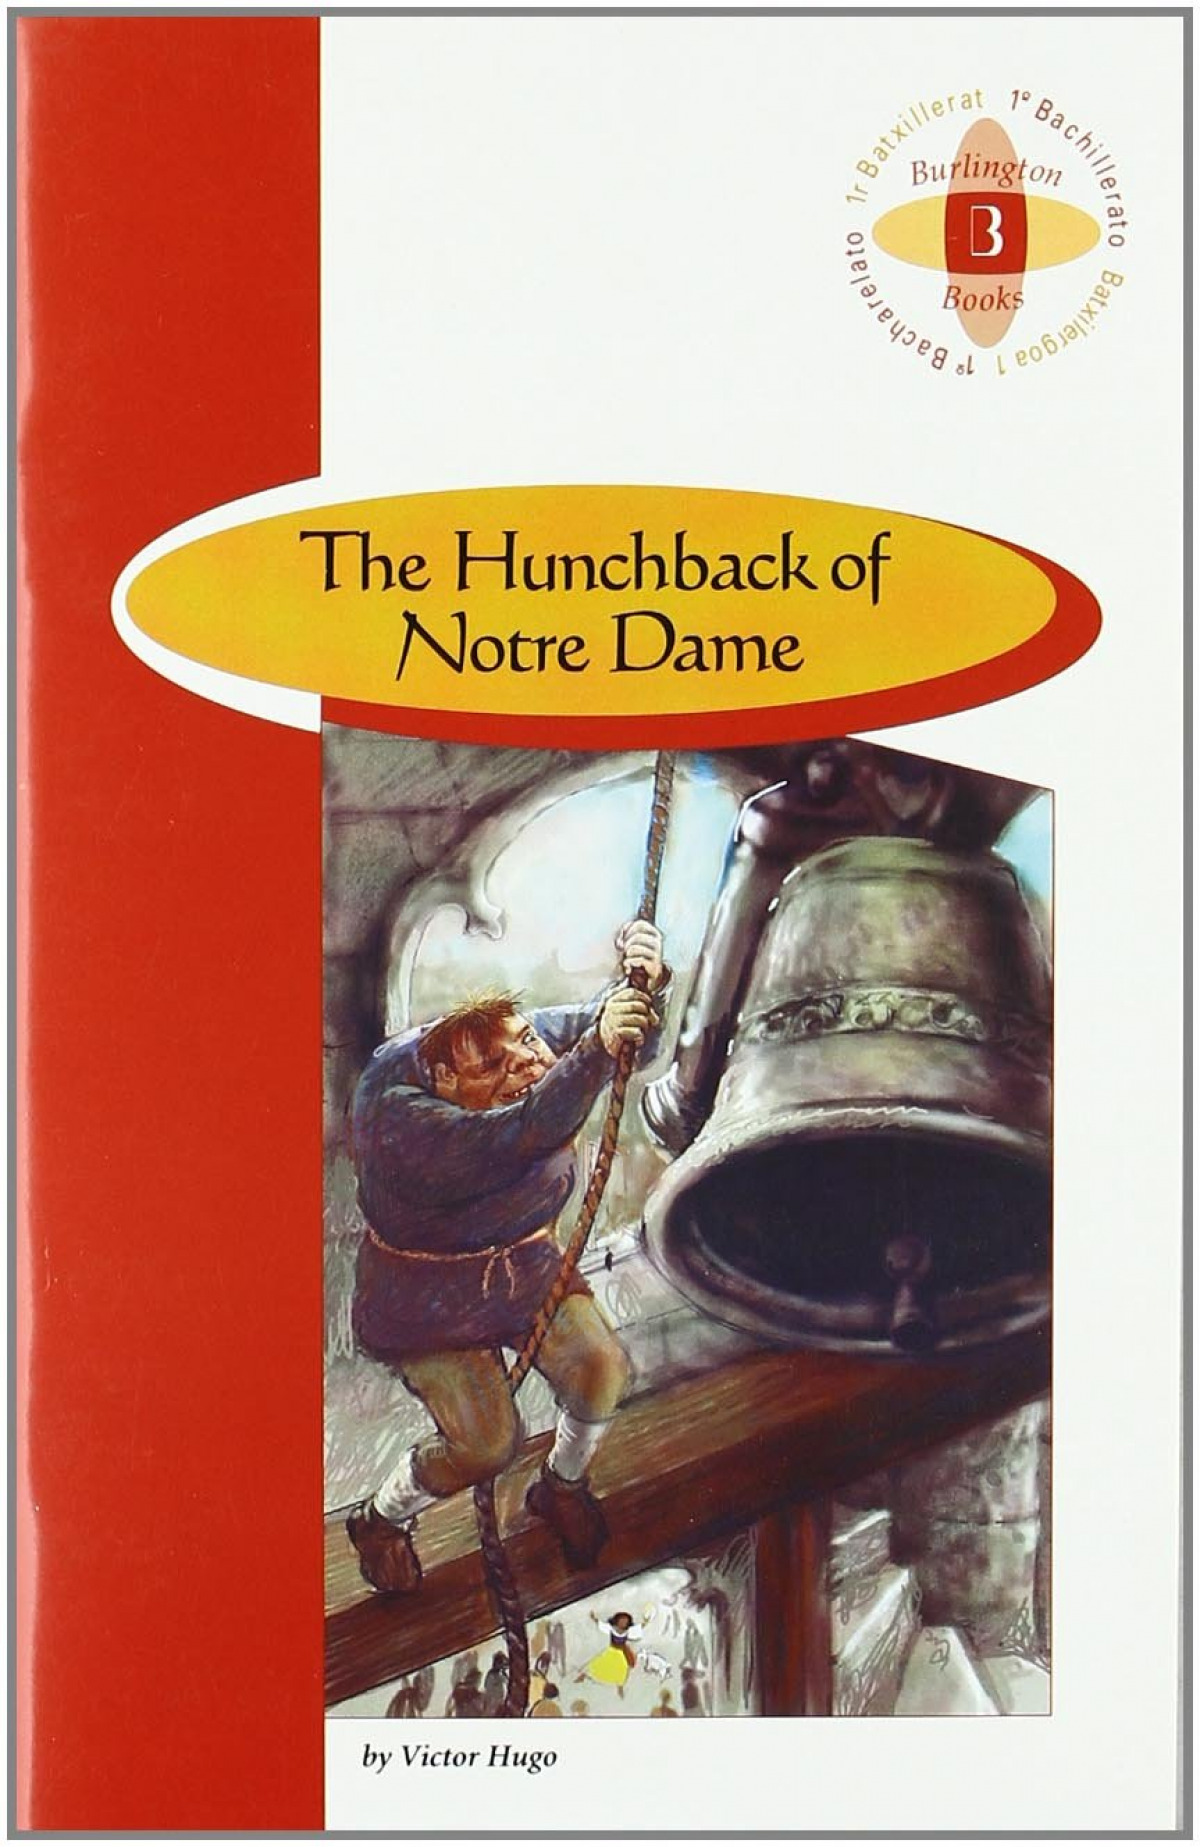 The hunchback of notre dame